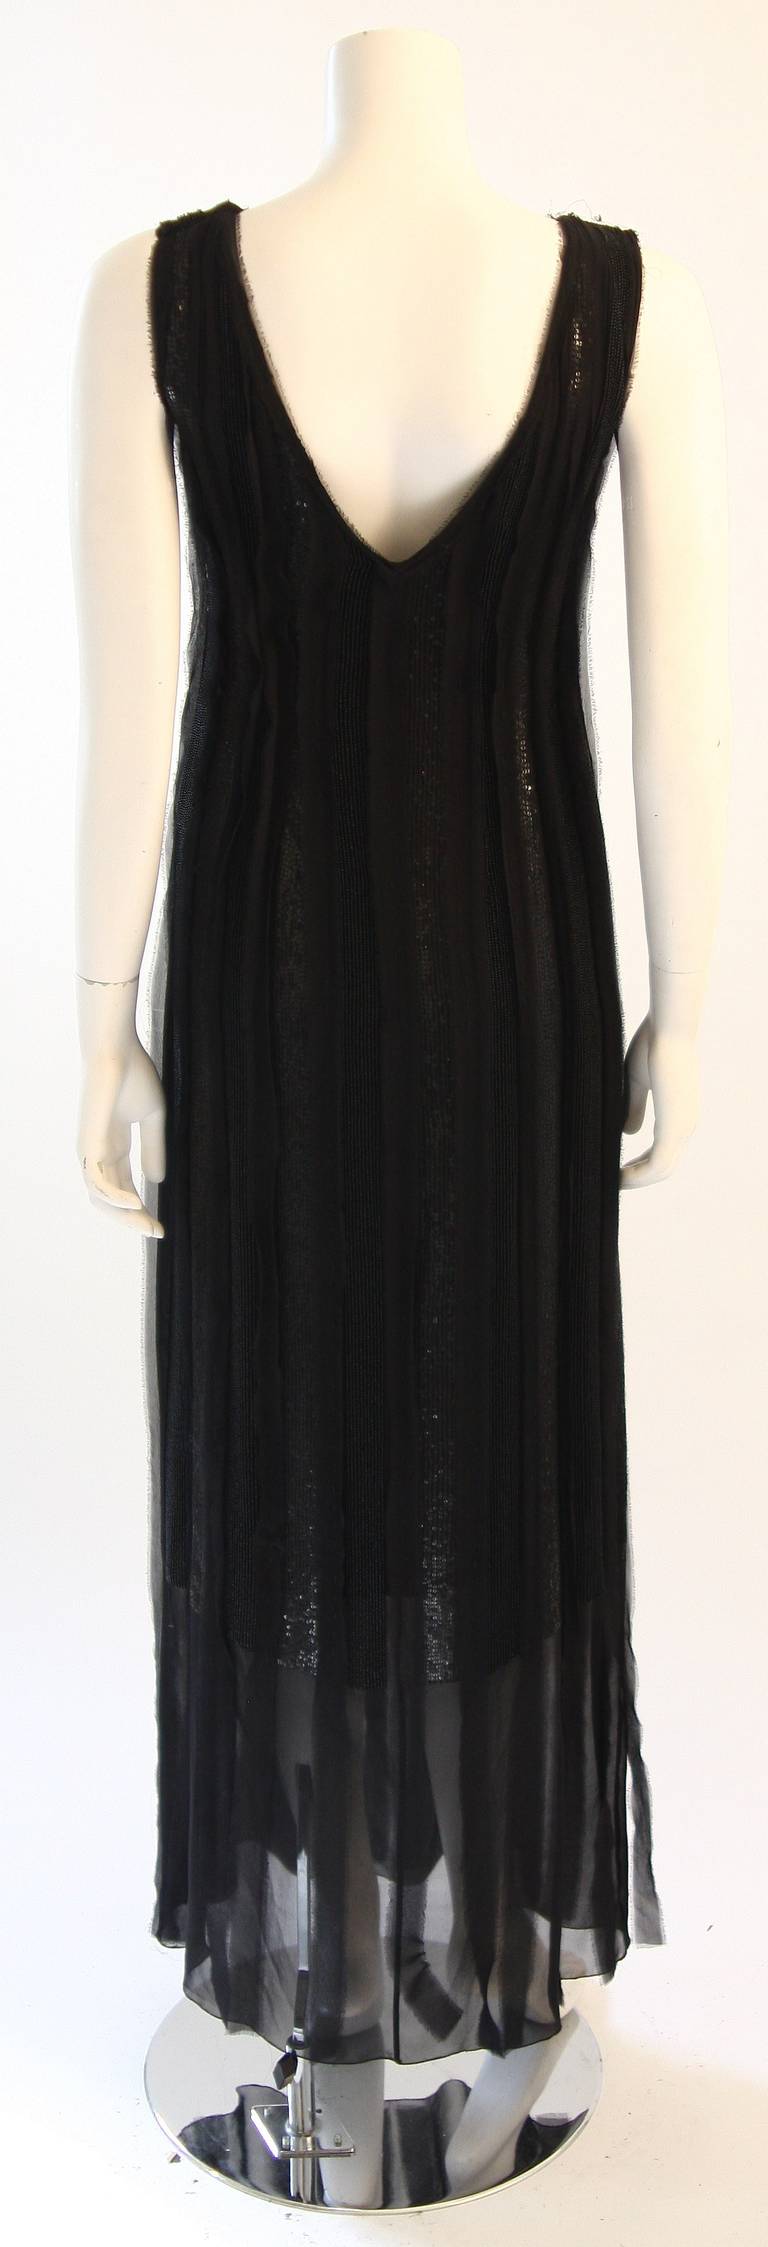 Alberta Ferretti Black Beaded Silk Chiffon Understated Dress with Raw Finish 10 In Excellent Condition For Sale In Los Angeles, CA